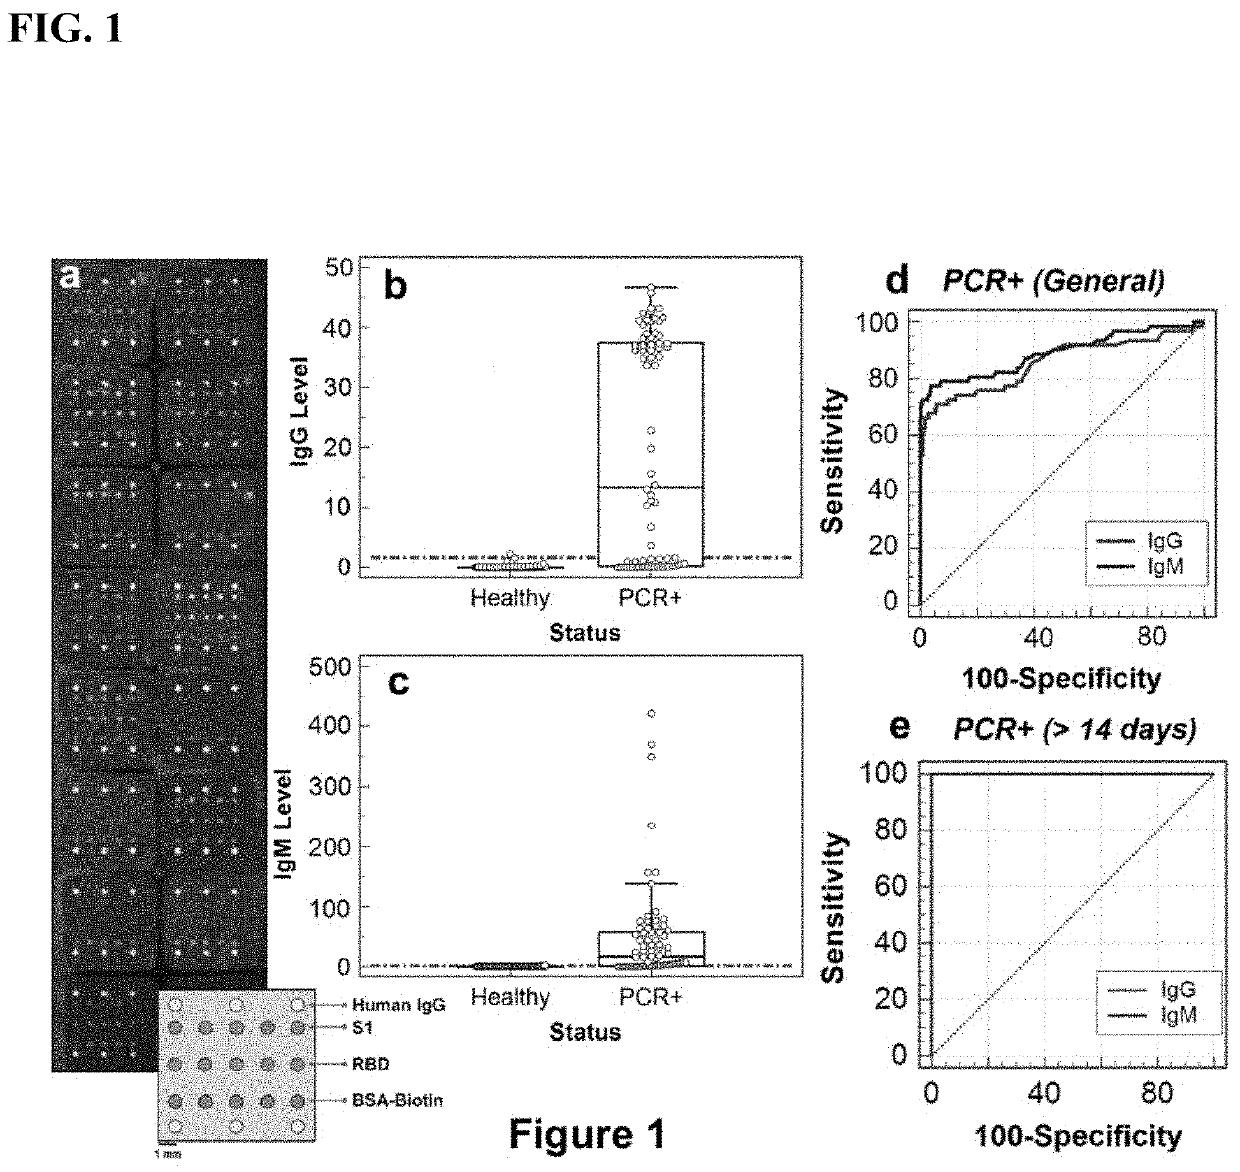 Assays, sensing platforms, and methods for diagnosis of coronavirus infection and re-infection